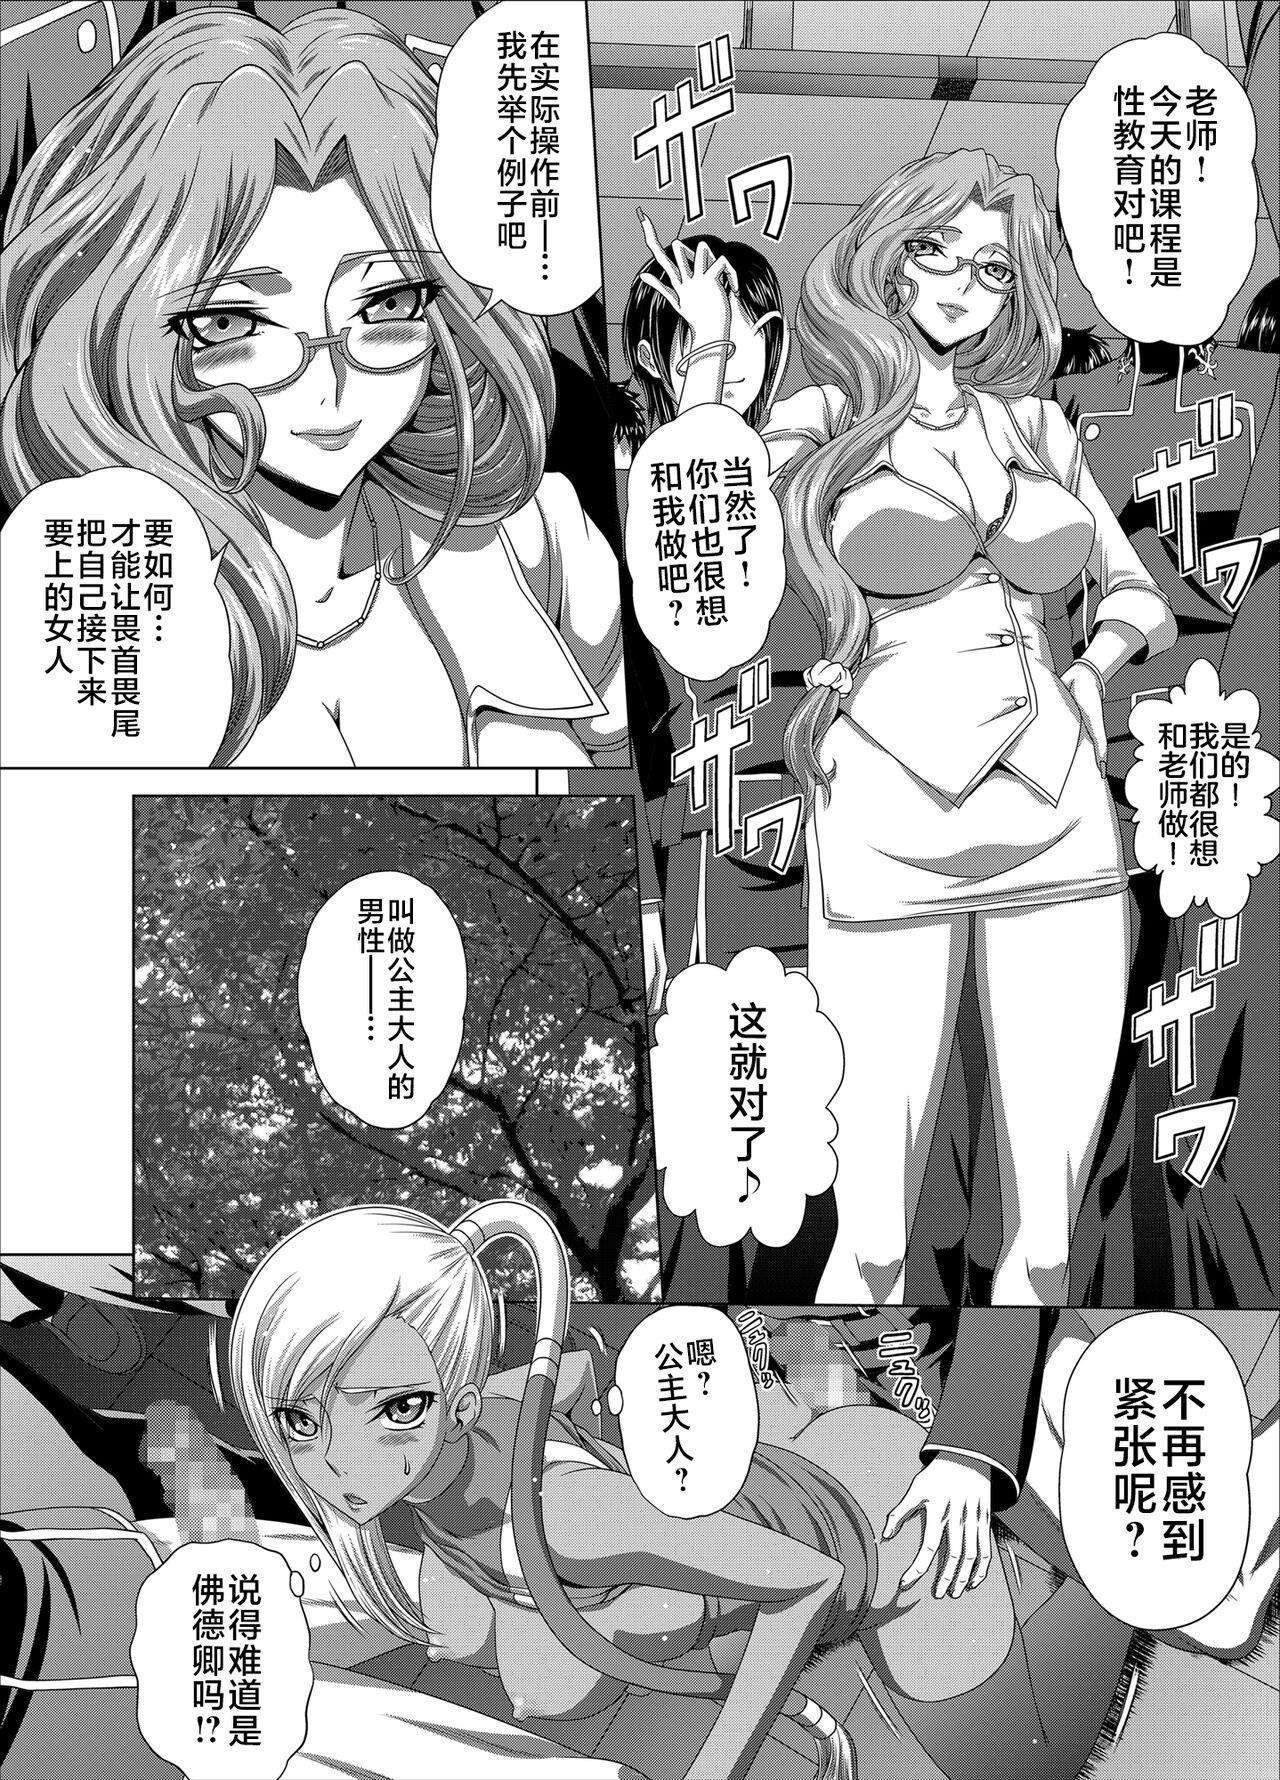 Indian C2lemon@Max 5 - Code geass Gaygroupsex - Page 7